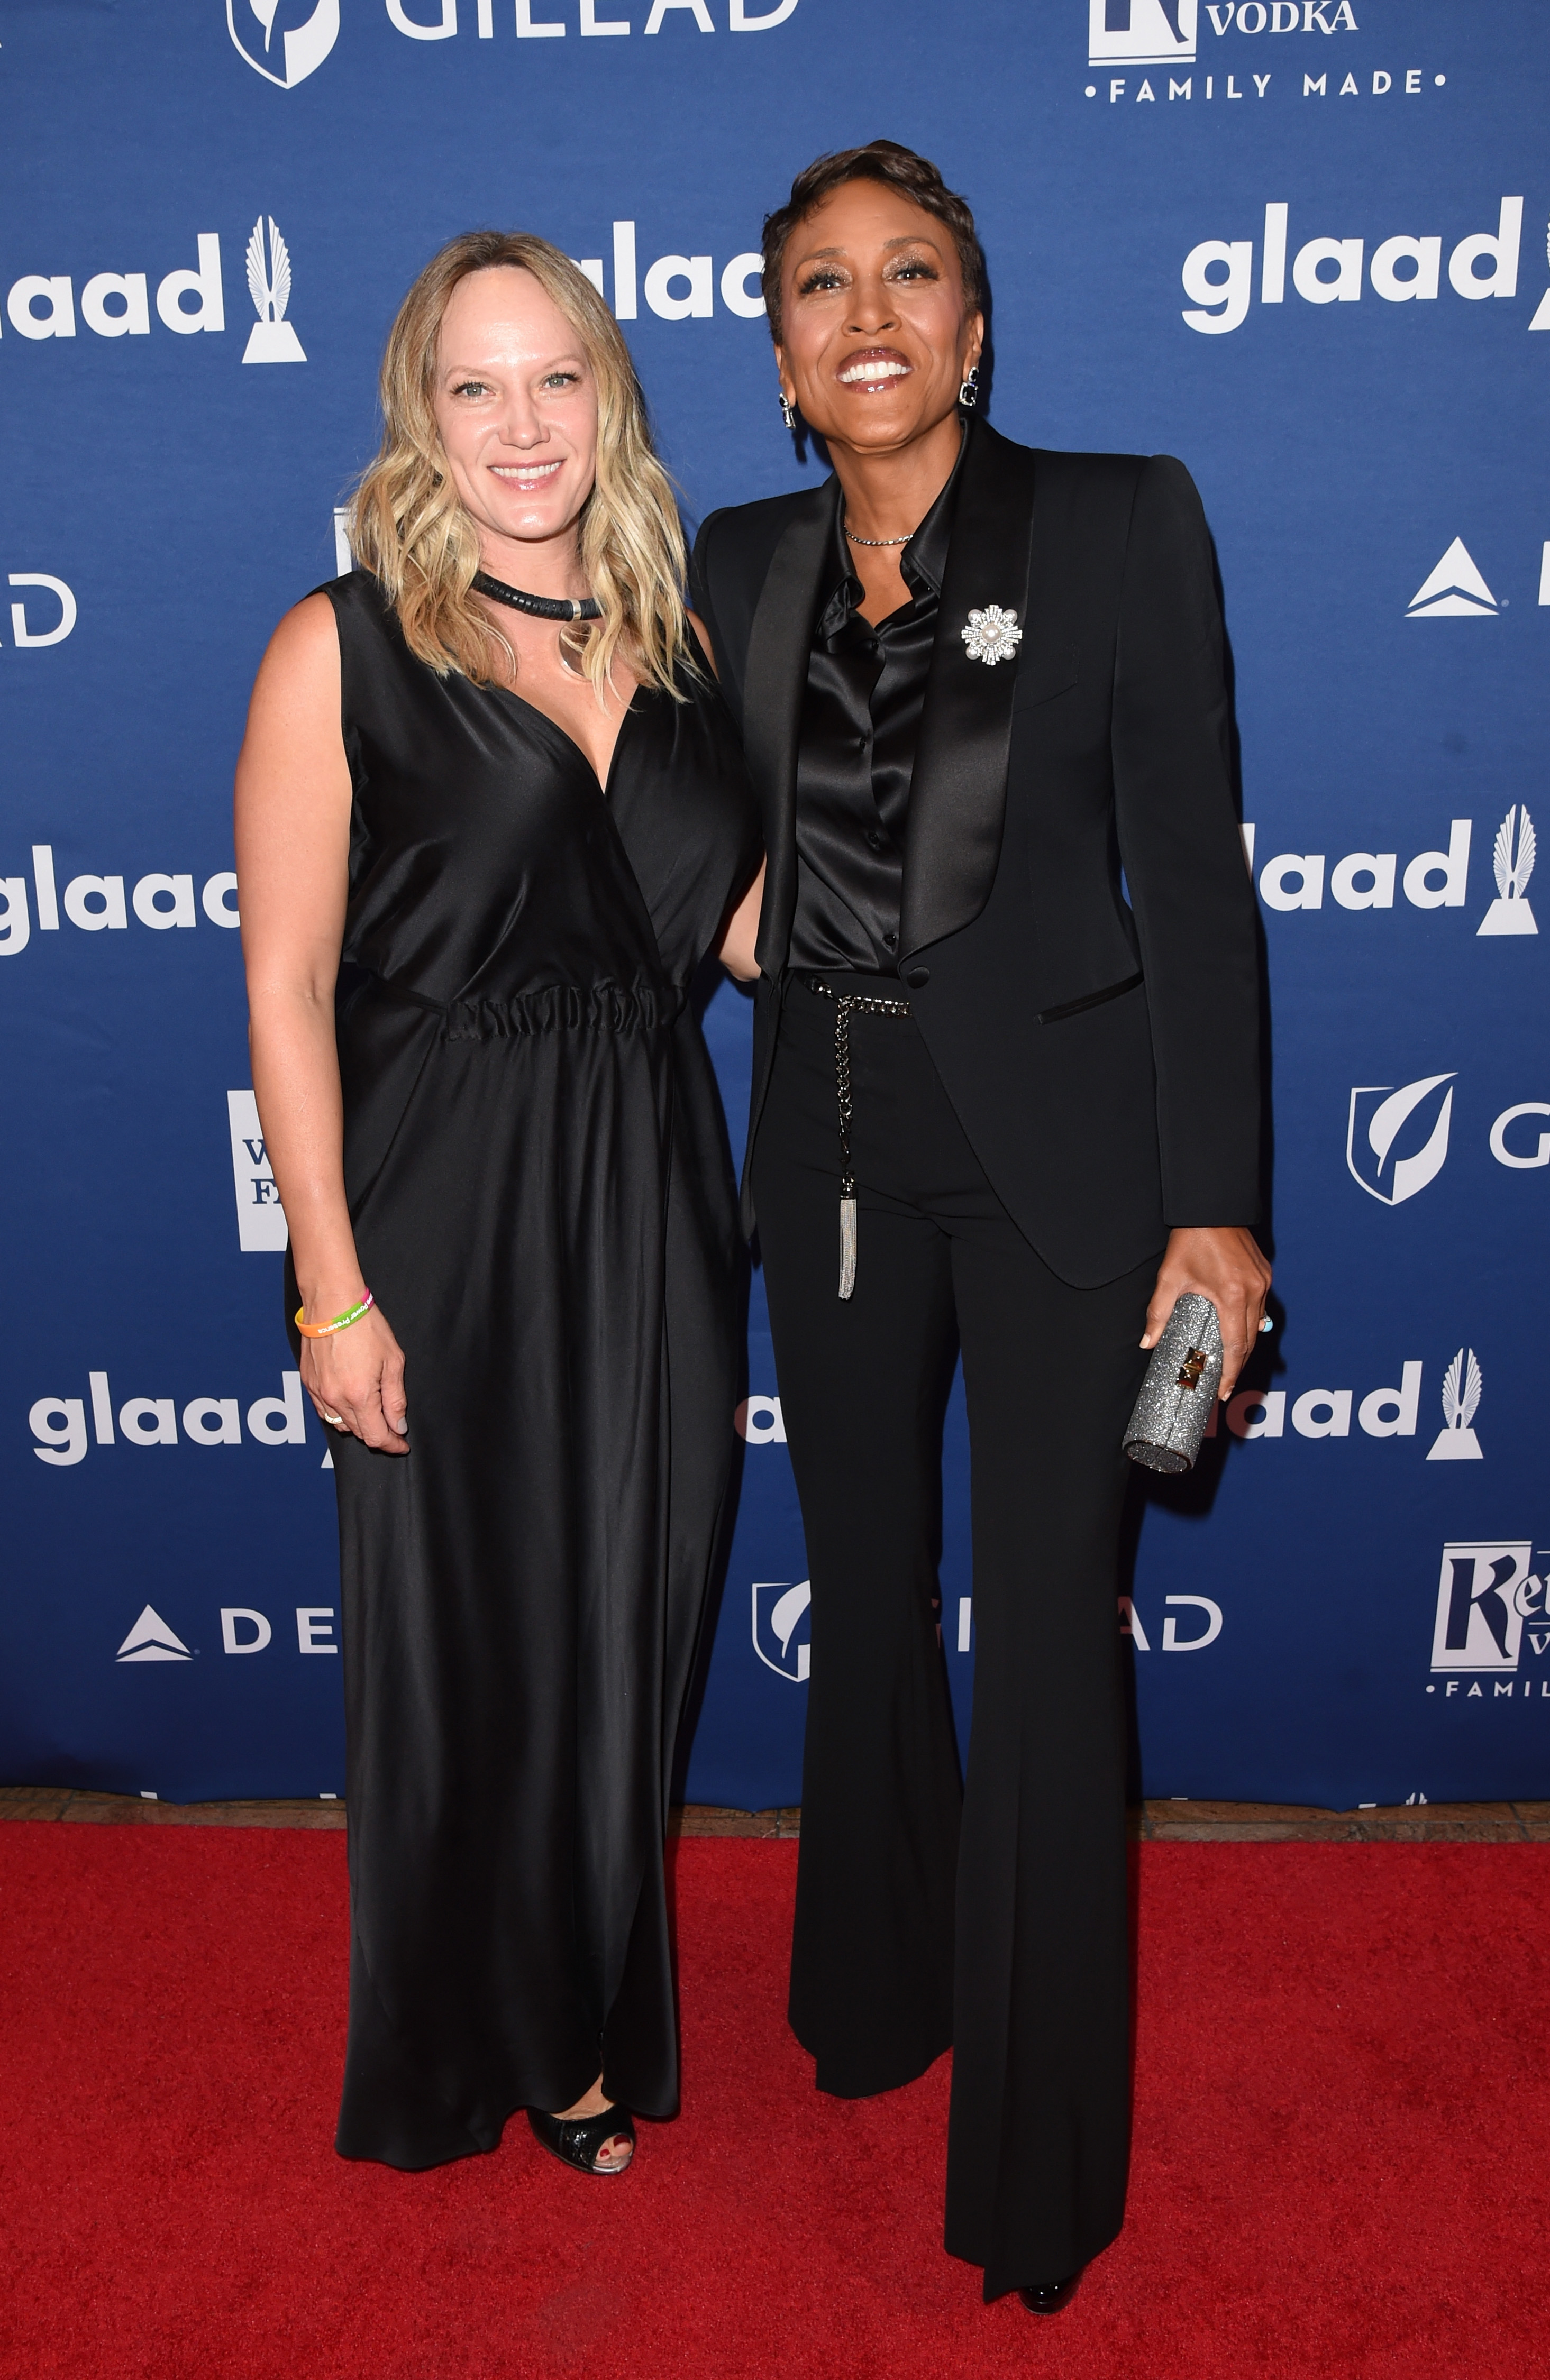 Amber Laign and Robin Roberts at the 29th Annual GLAAD Media Awards in New York City, 2018 | Source: Getty Images